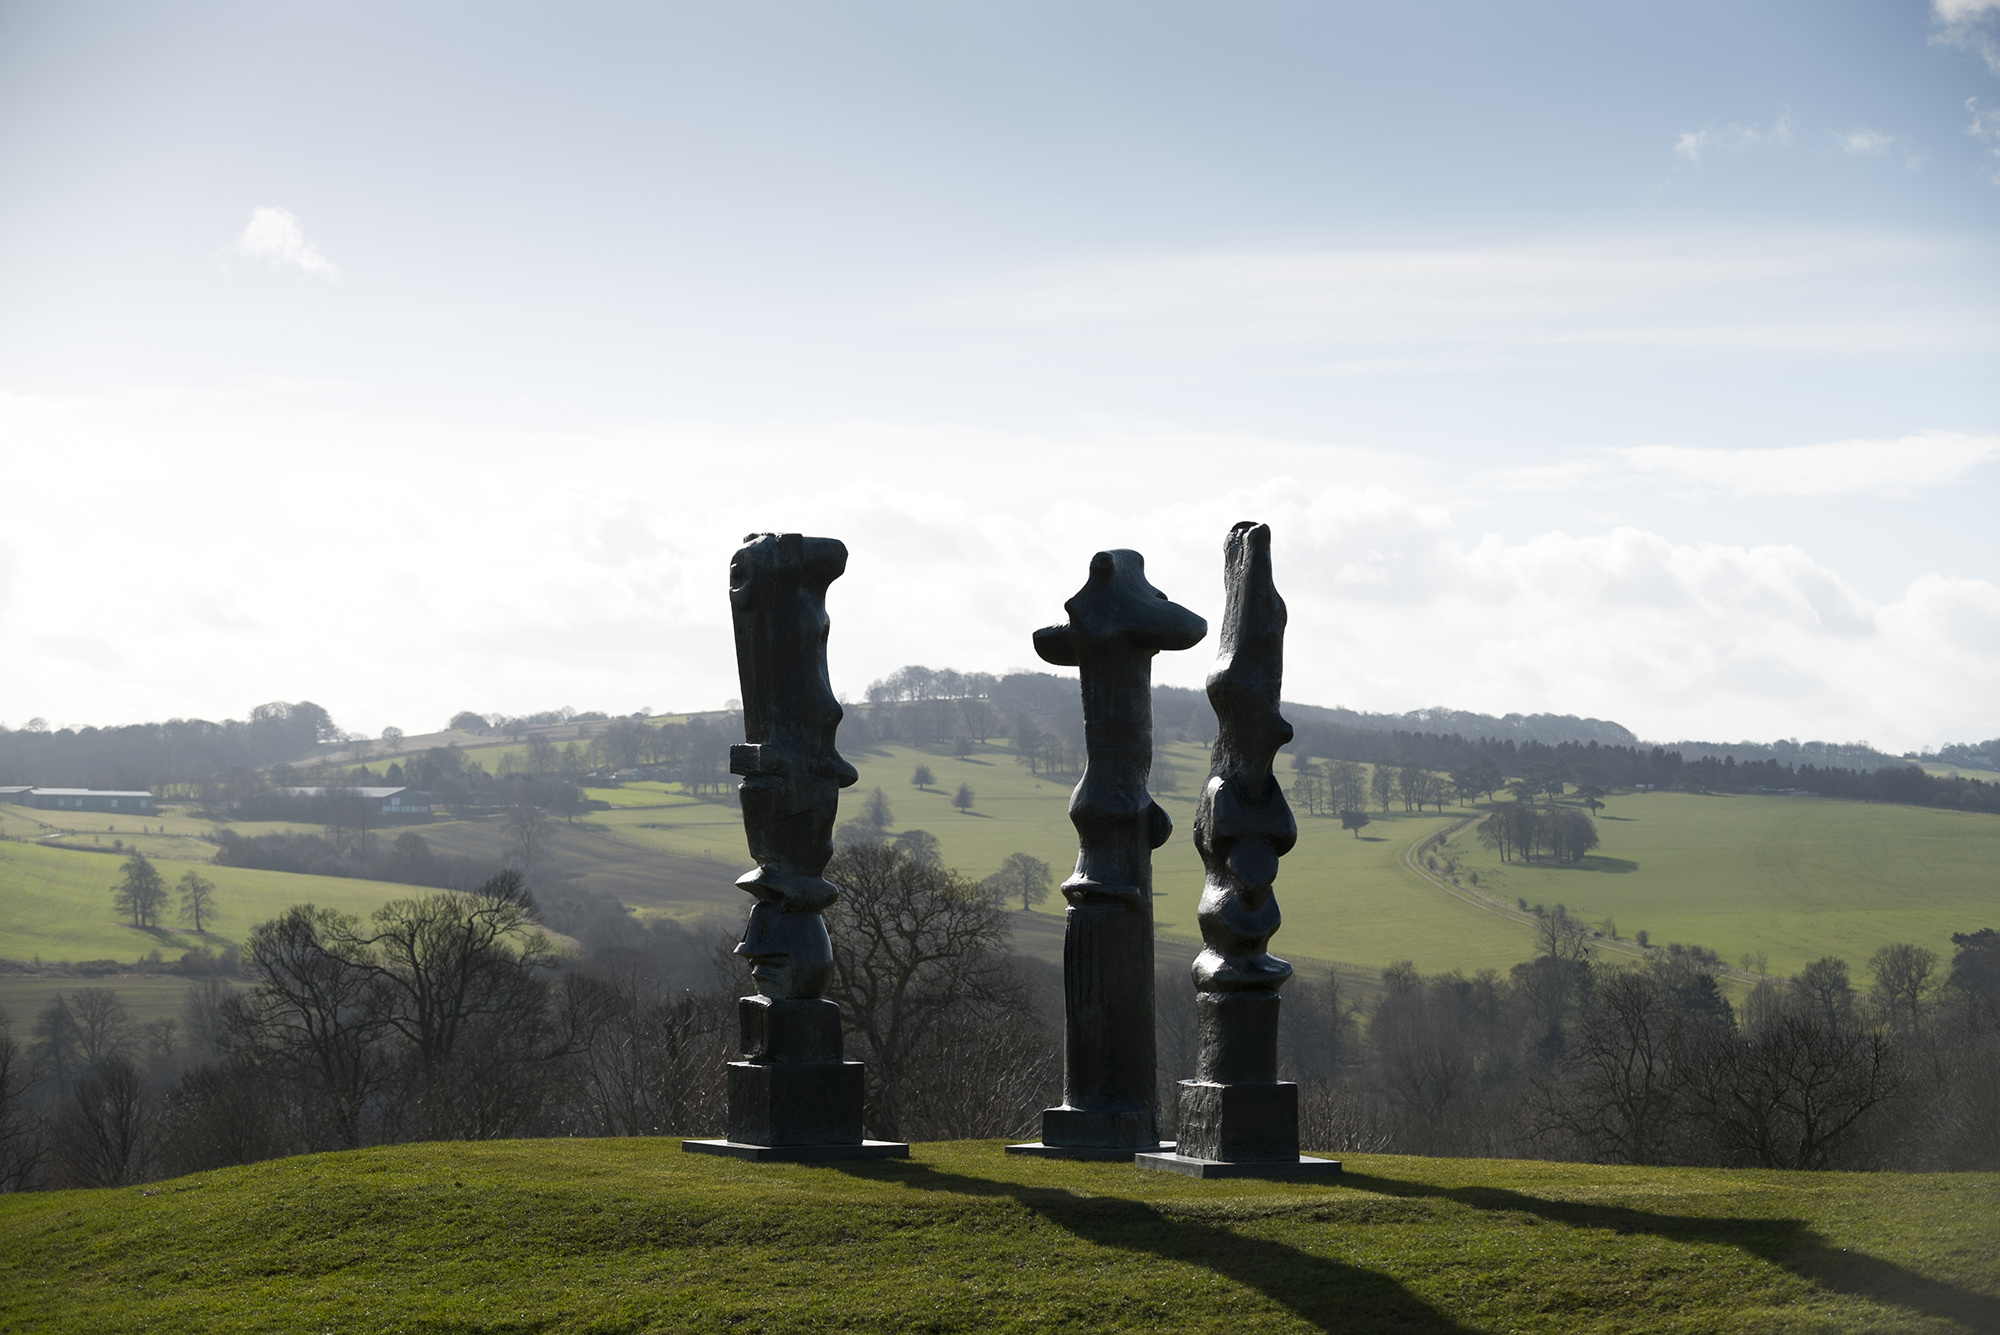 Three tall thin bronze sculptures looking out over the landscape